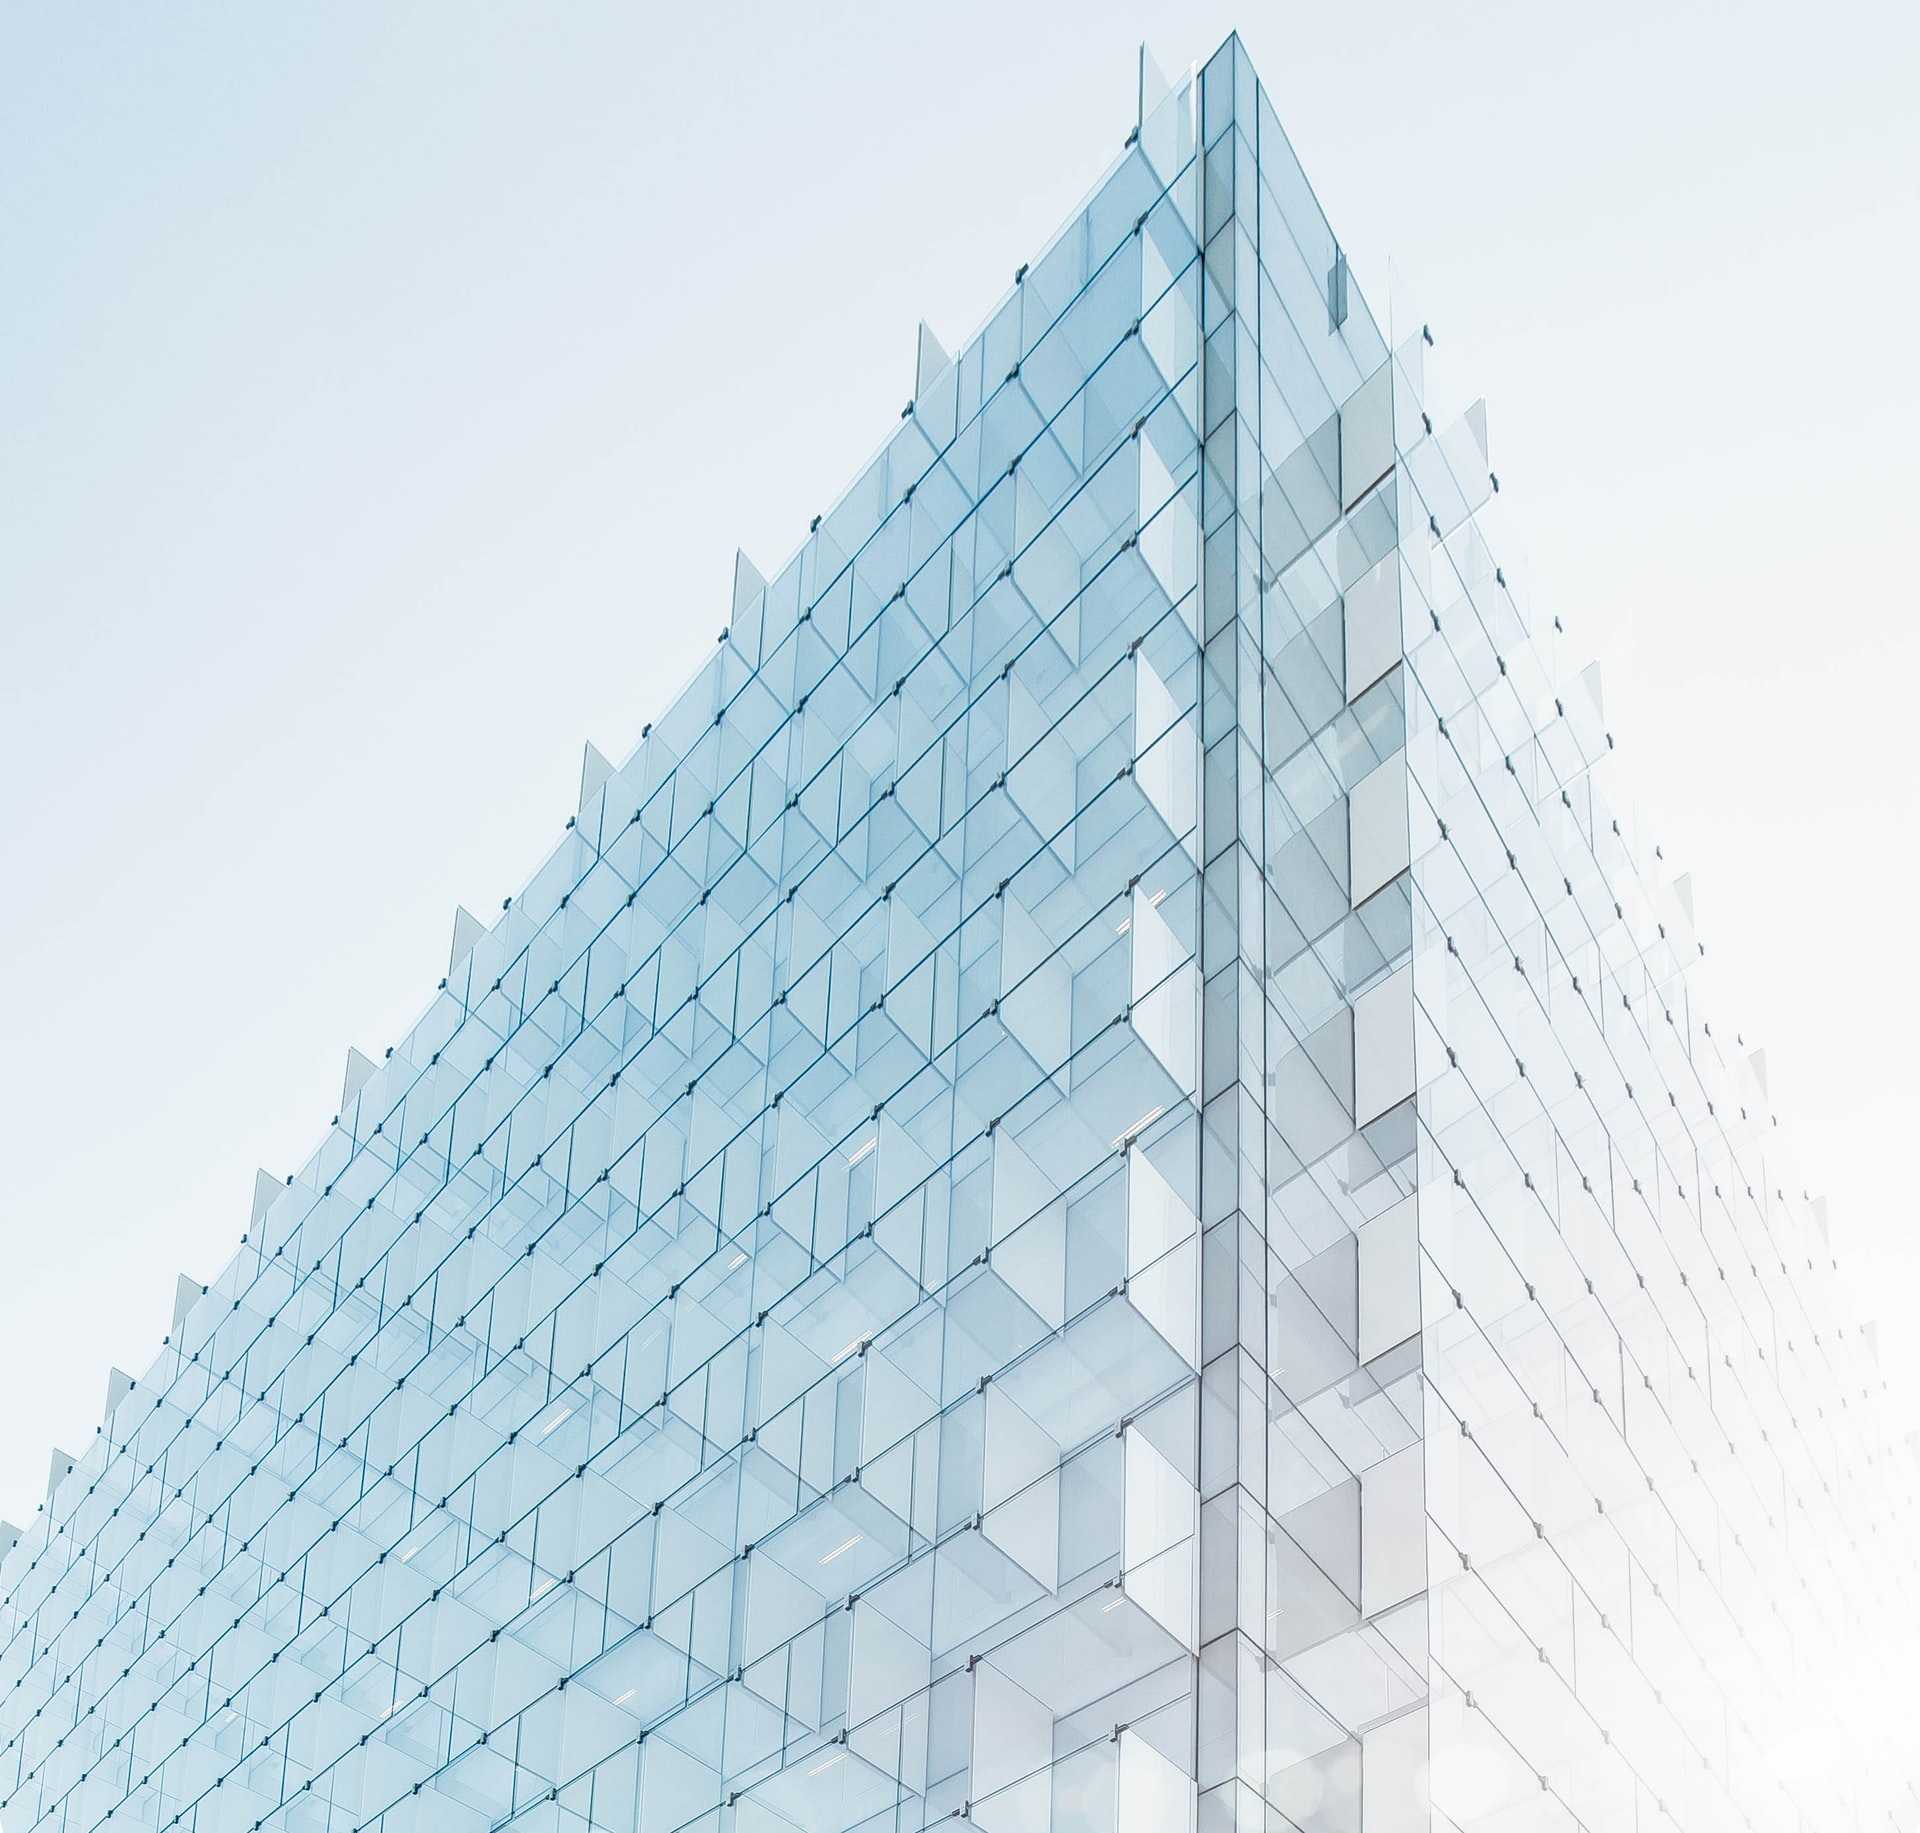 A building facade made of intricate glass panels.